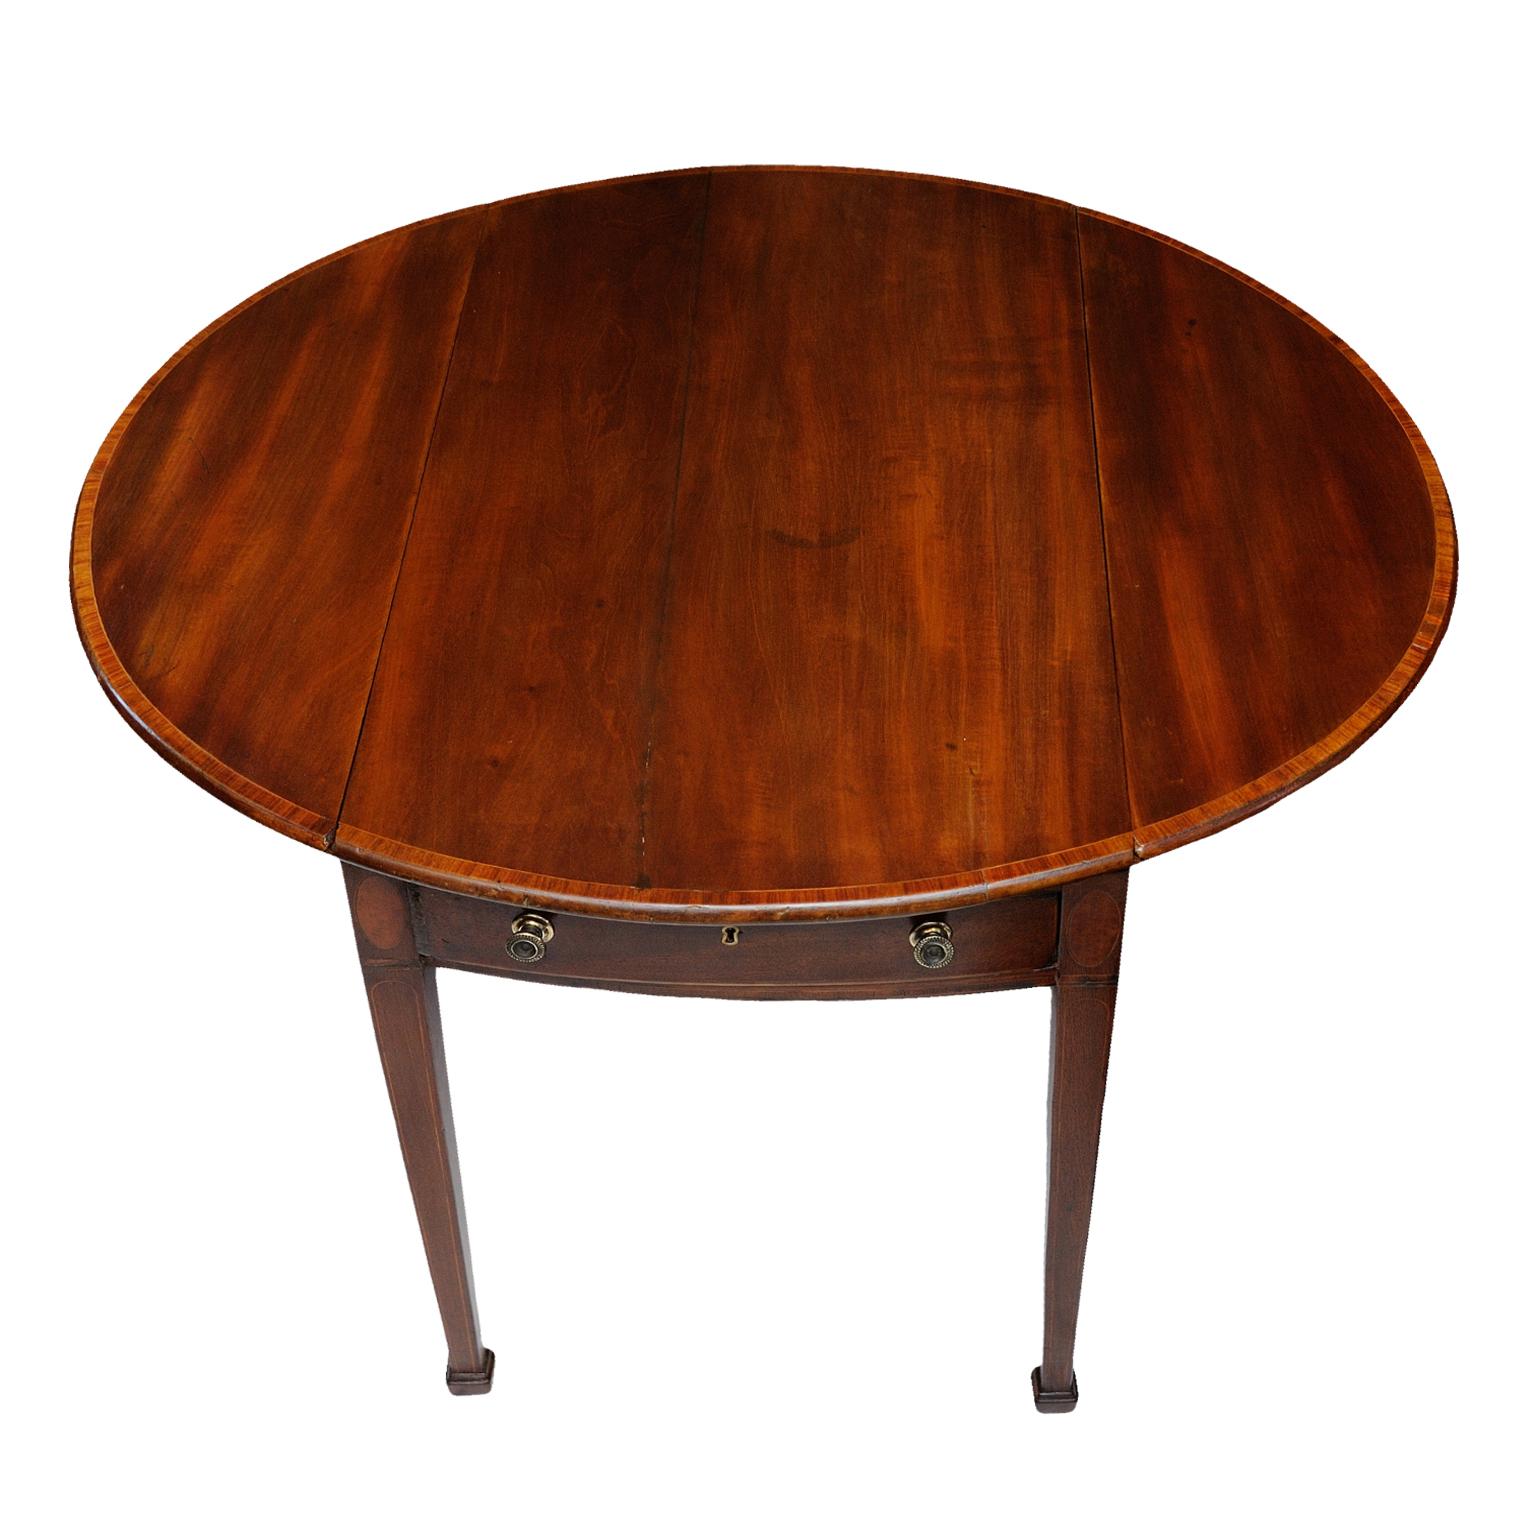 English George III Hepplewhite Period Mahogany Oval Pembroke Table, circa 1790 In Good Condition For Sale In Tetbury, Gloucestershire